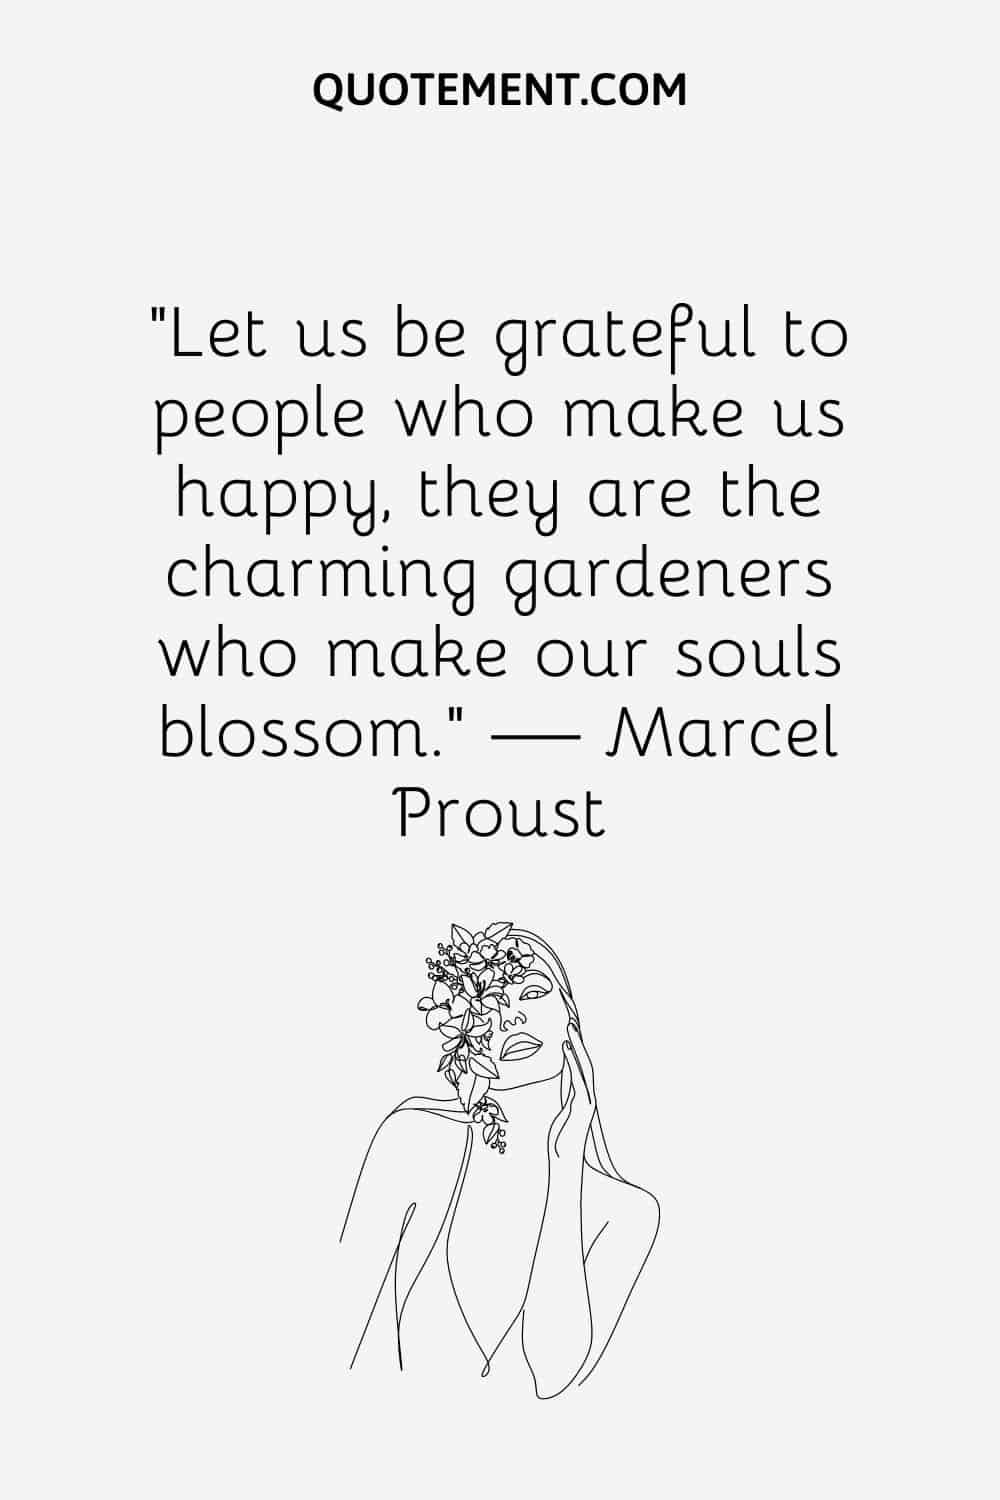 “Let us be grateful to people who make us happy, they are the charming gardeners who make our souls blossom.” — Marcel Proust